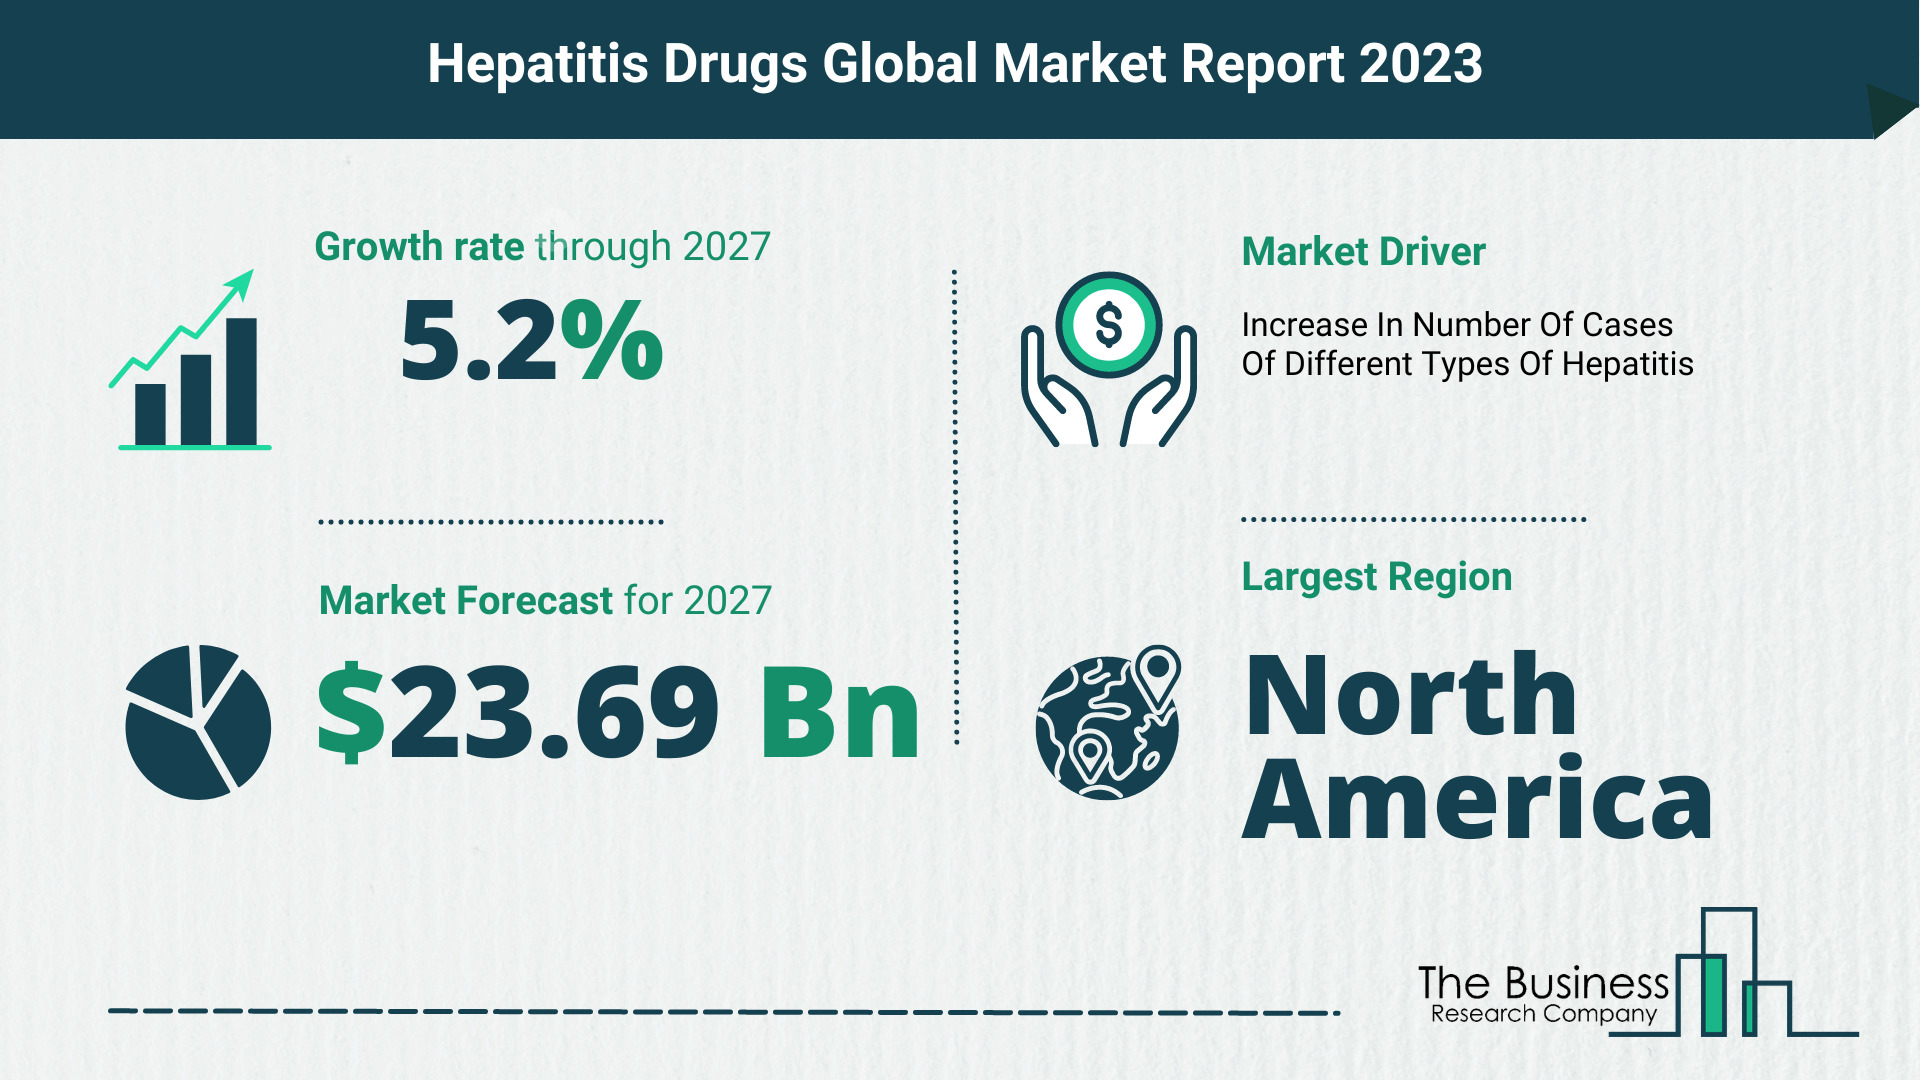 How Will The Hepatitis Drugs Market Globally Expand In 2023?